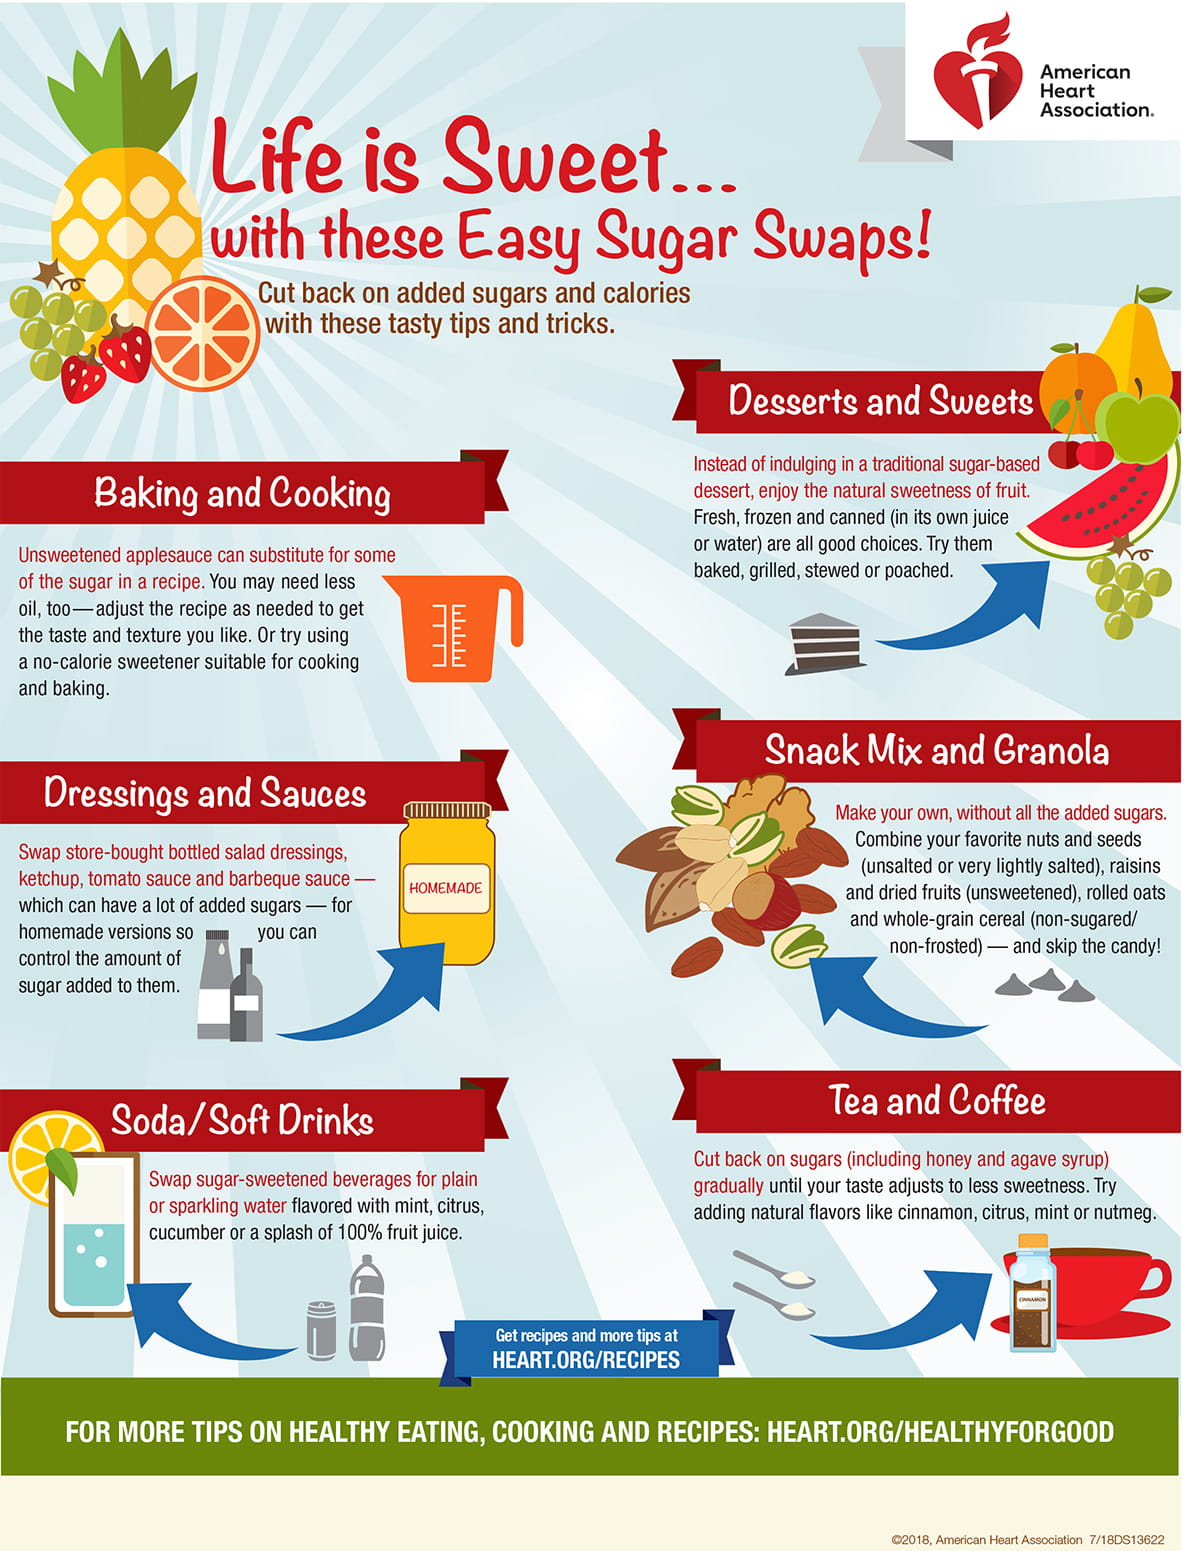 Life is Sweet Infographic